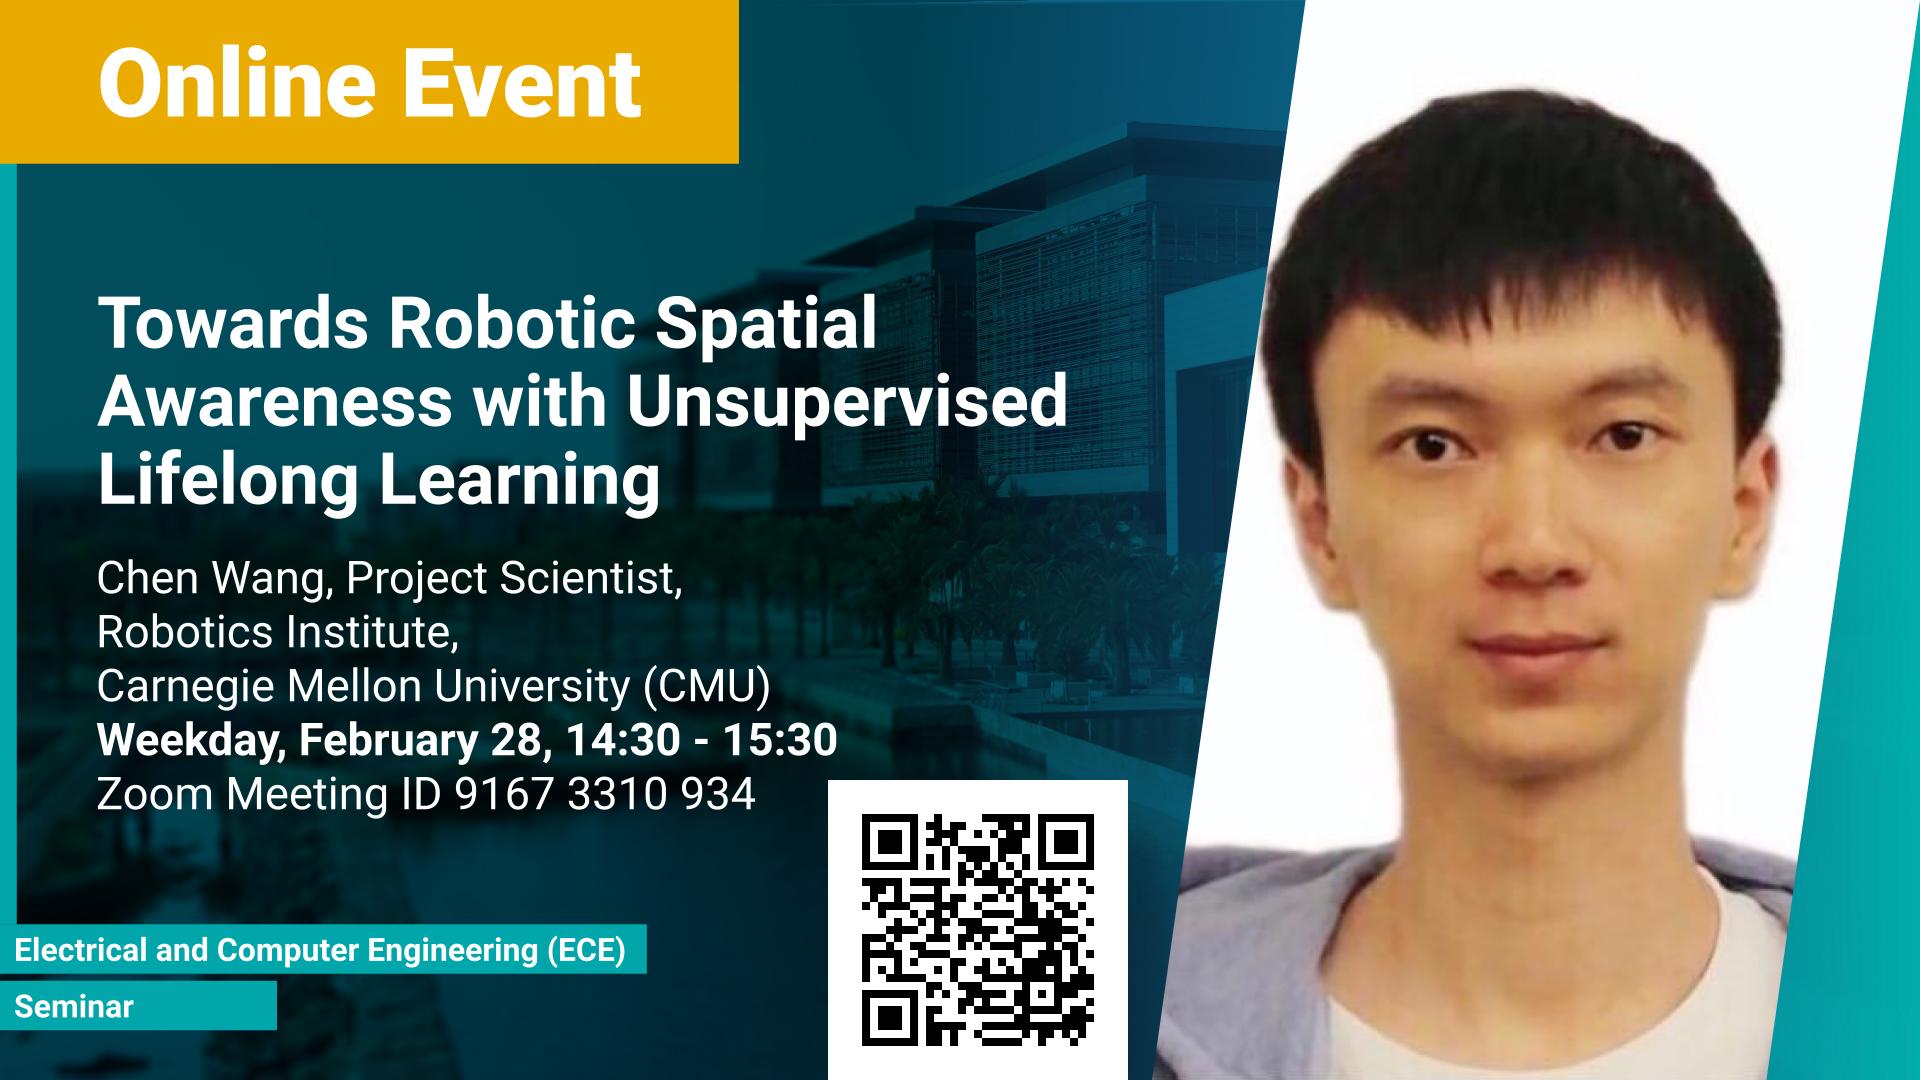 KAUST-CEMSE-ECE-Seminar-Chen-Wang-Towards Robotic Spatial Awareness with Unsupervised Lifelong Learning.jpg